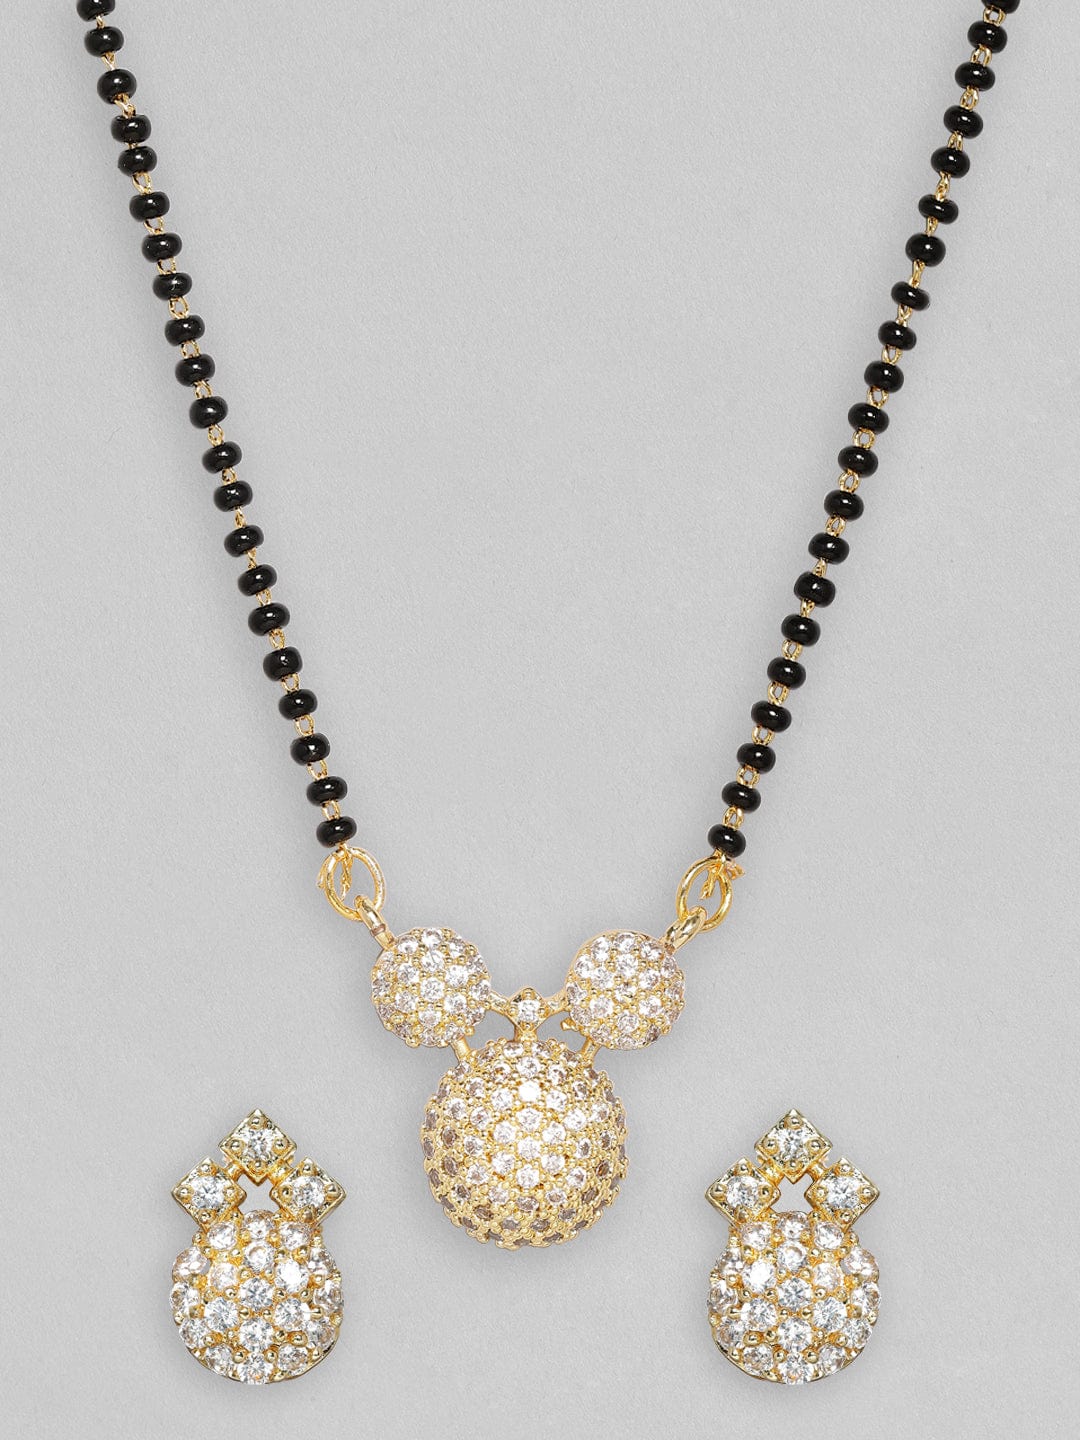 18 KT Gold Plated Zirconia Studded Mangalsutra Necklaces, Necklace Sets, Chains & Mangalsutra